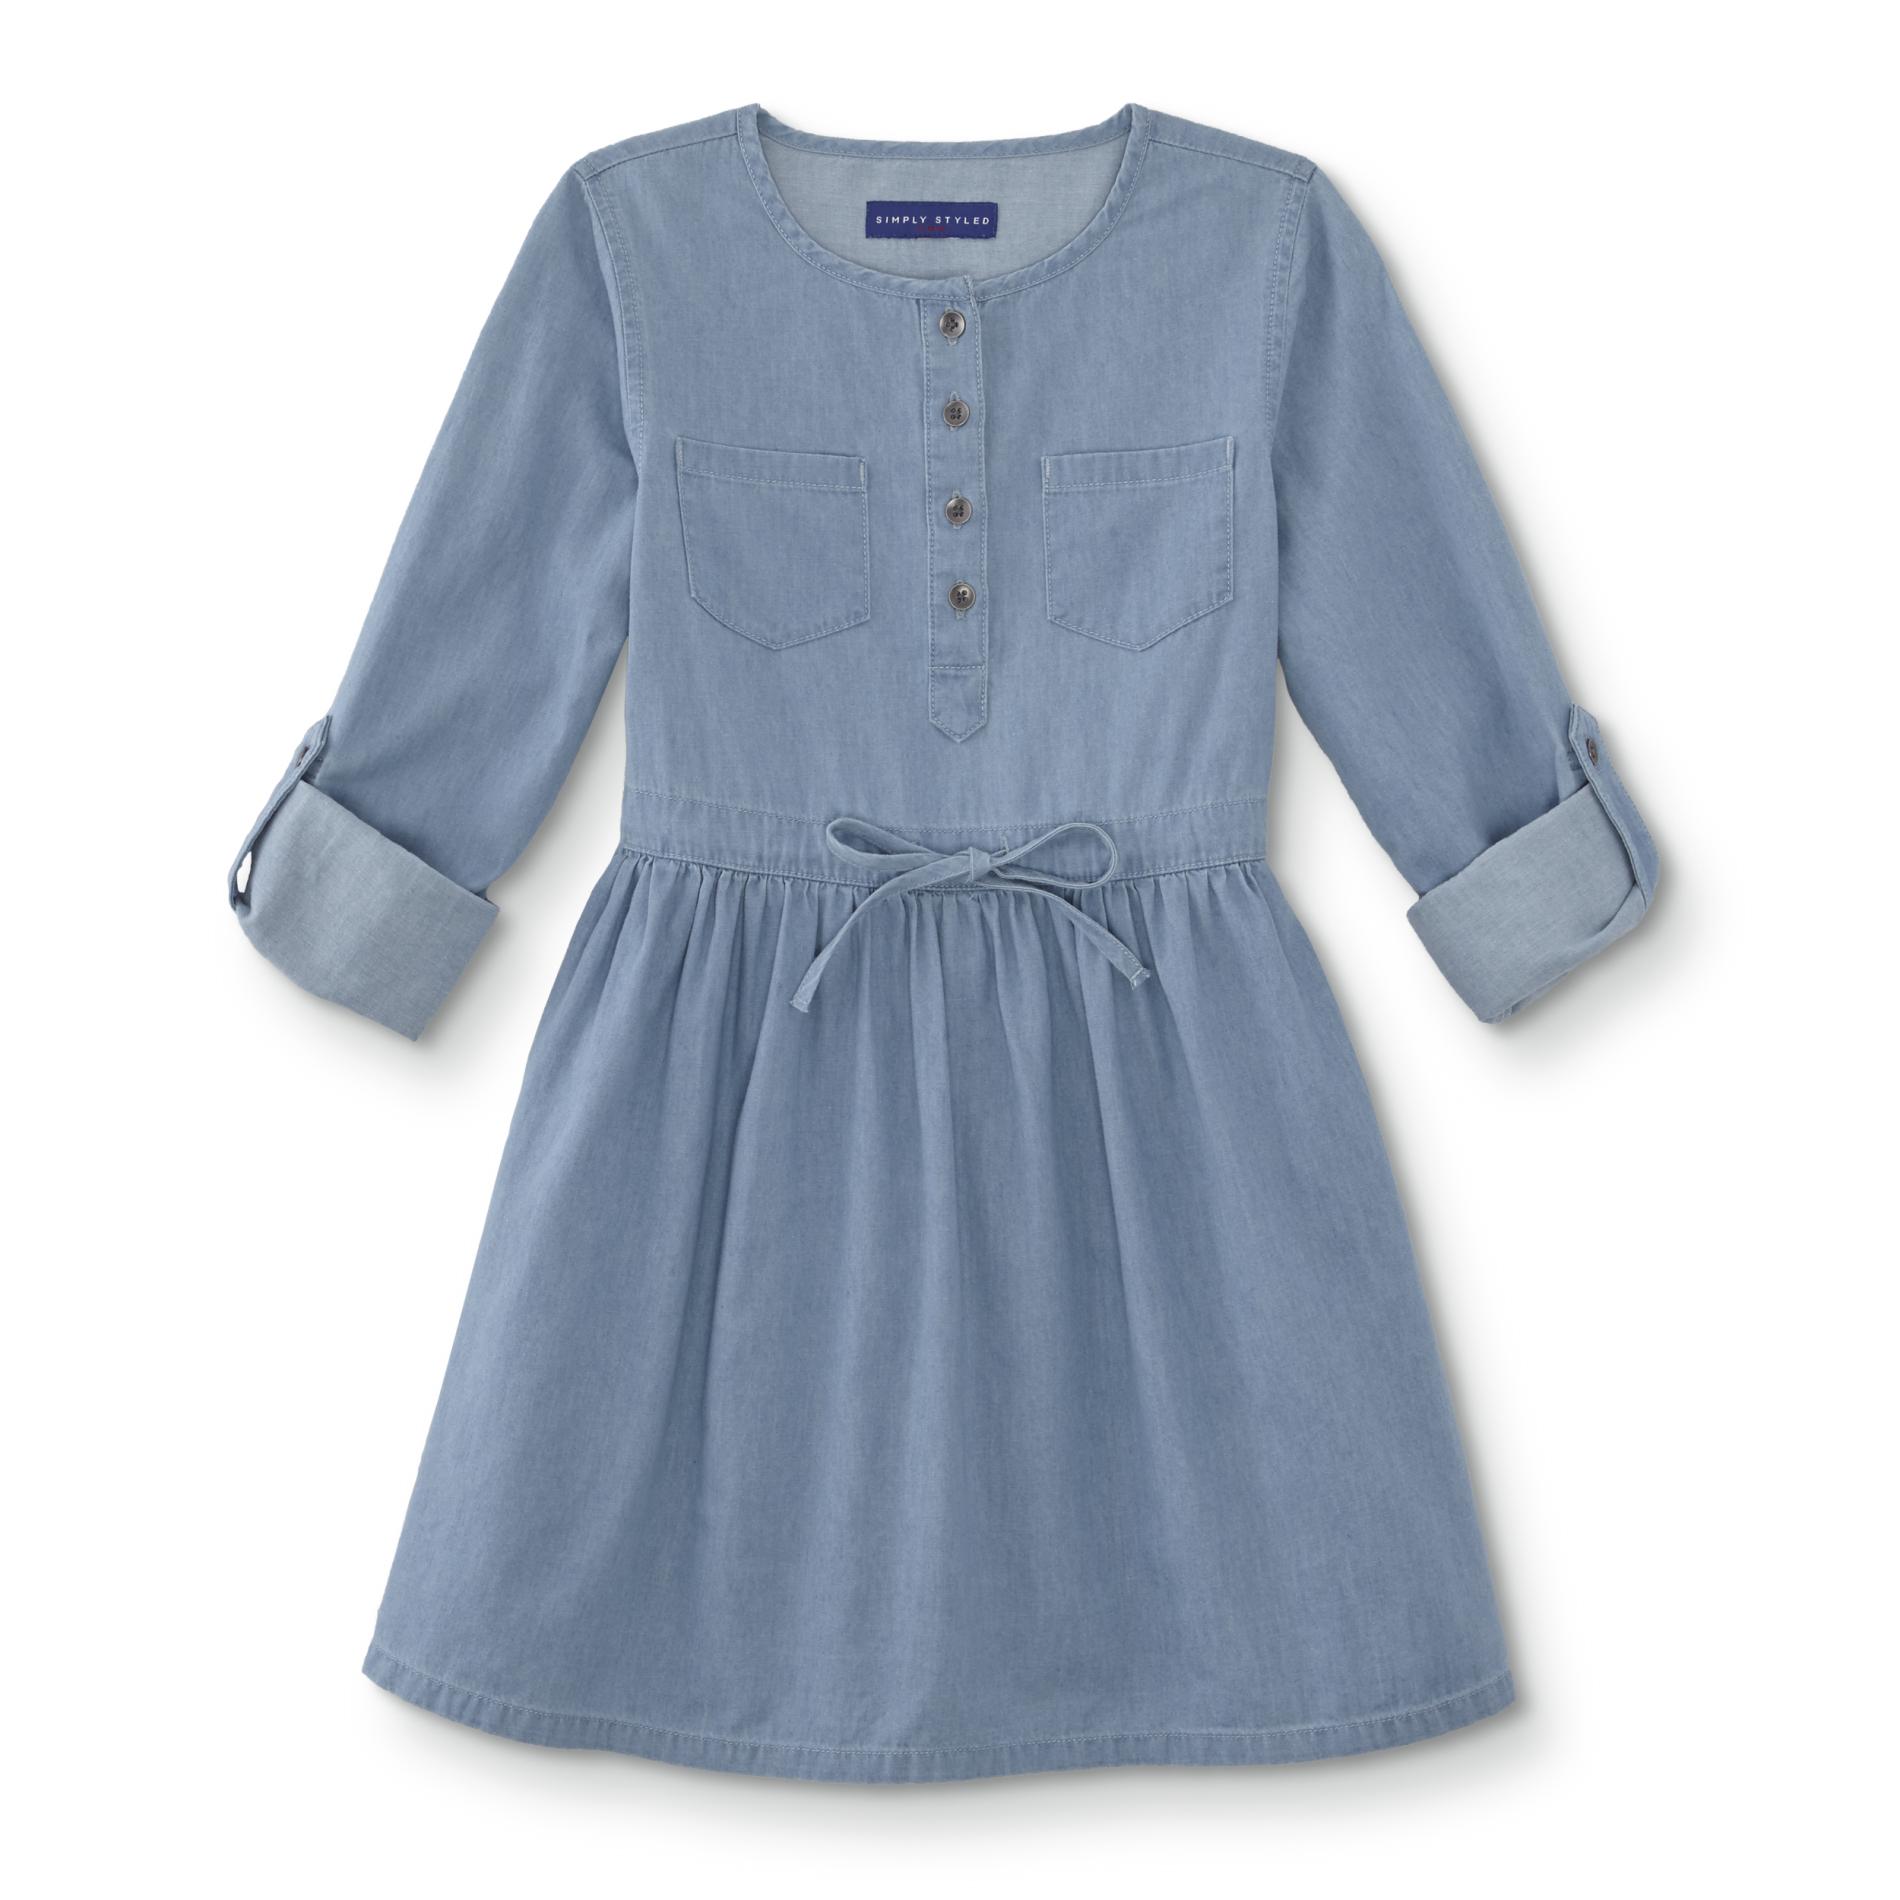 Simply Styled Girls' Chambray Fit & Flare Dress